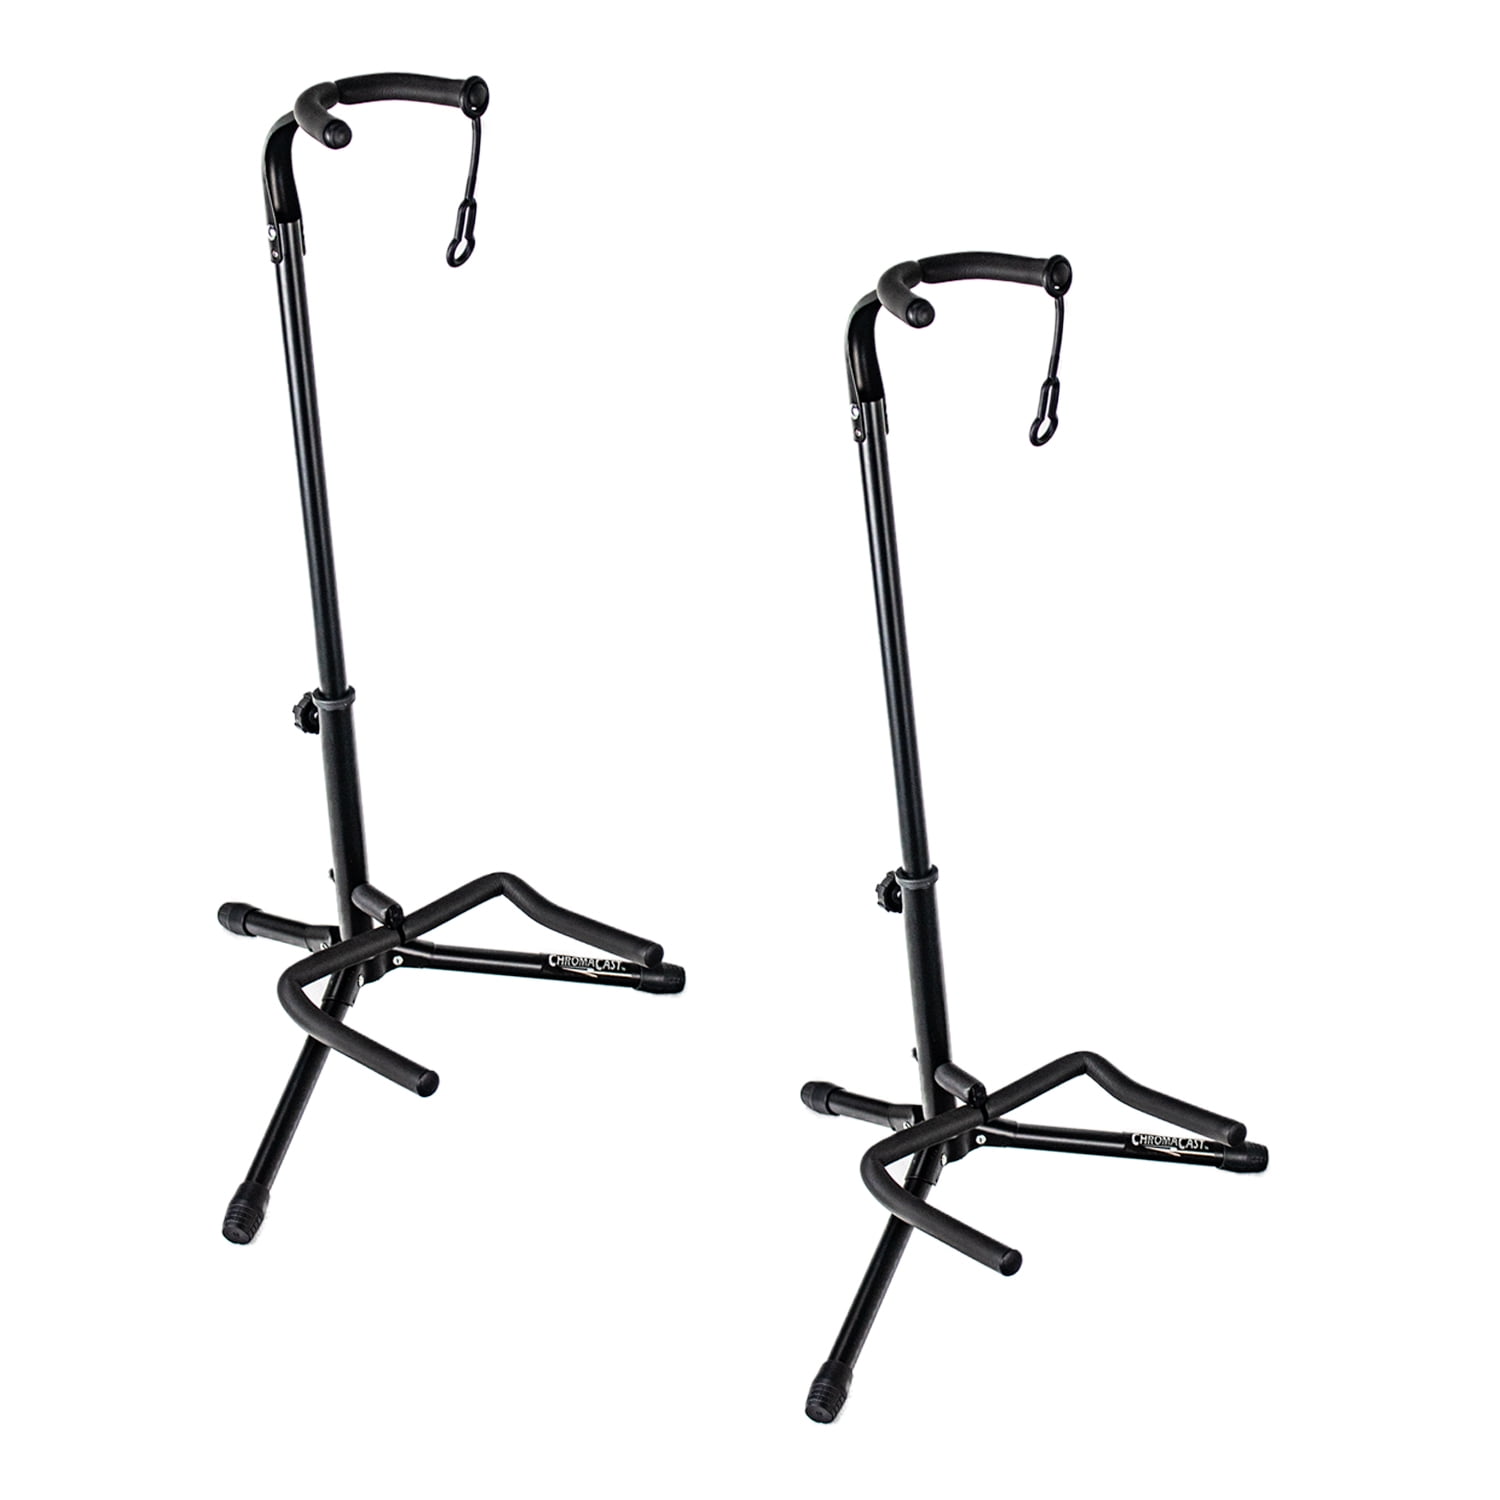 ChromaCast 25.5 to 30 Adjustable Upright Guitar Stand, Extended